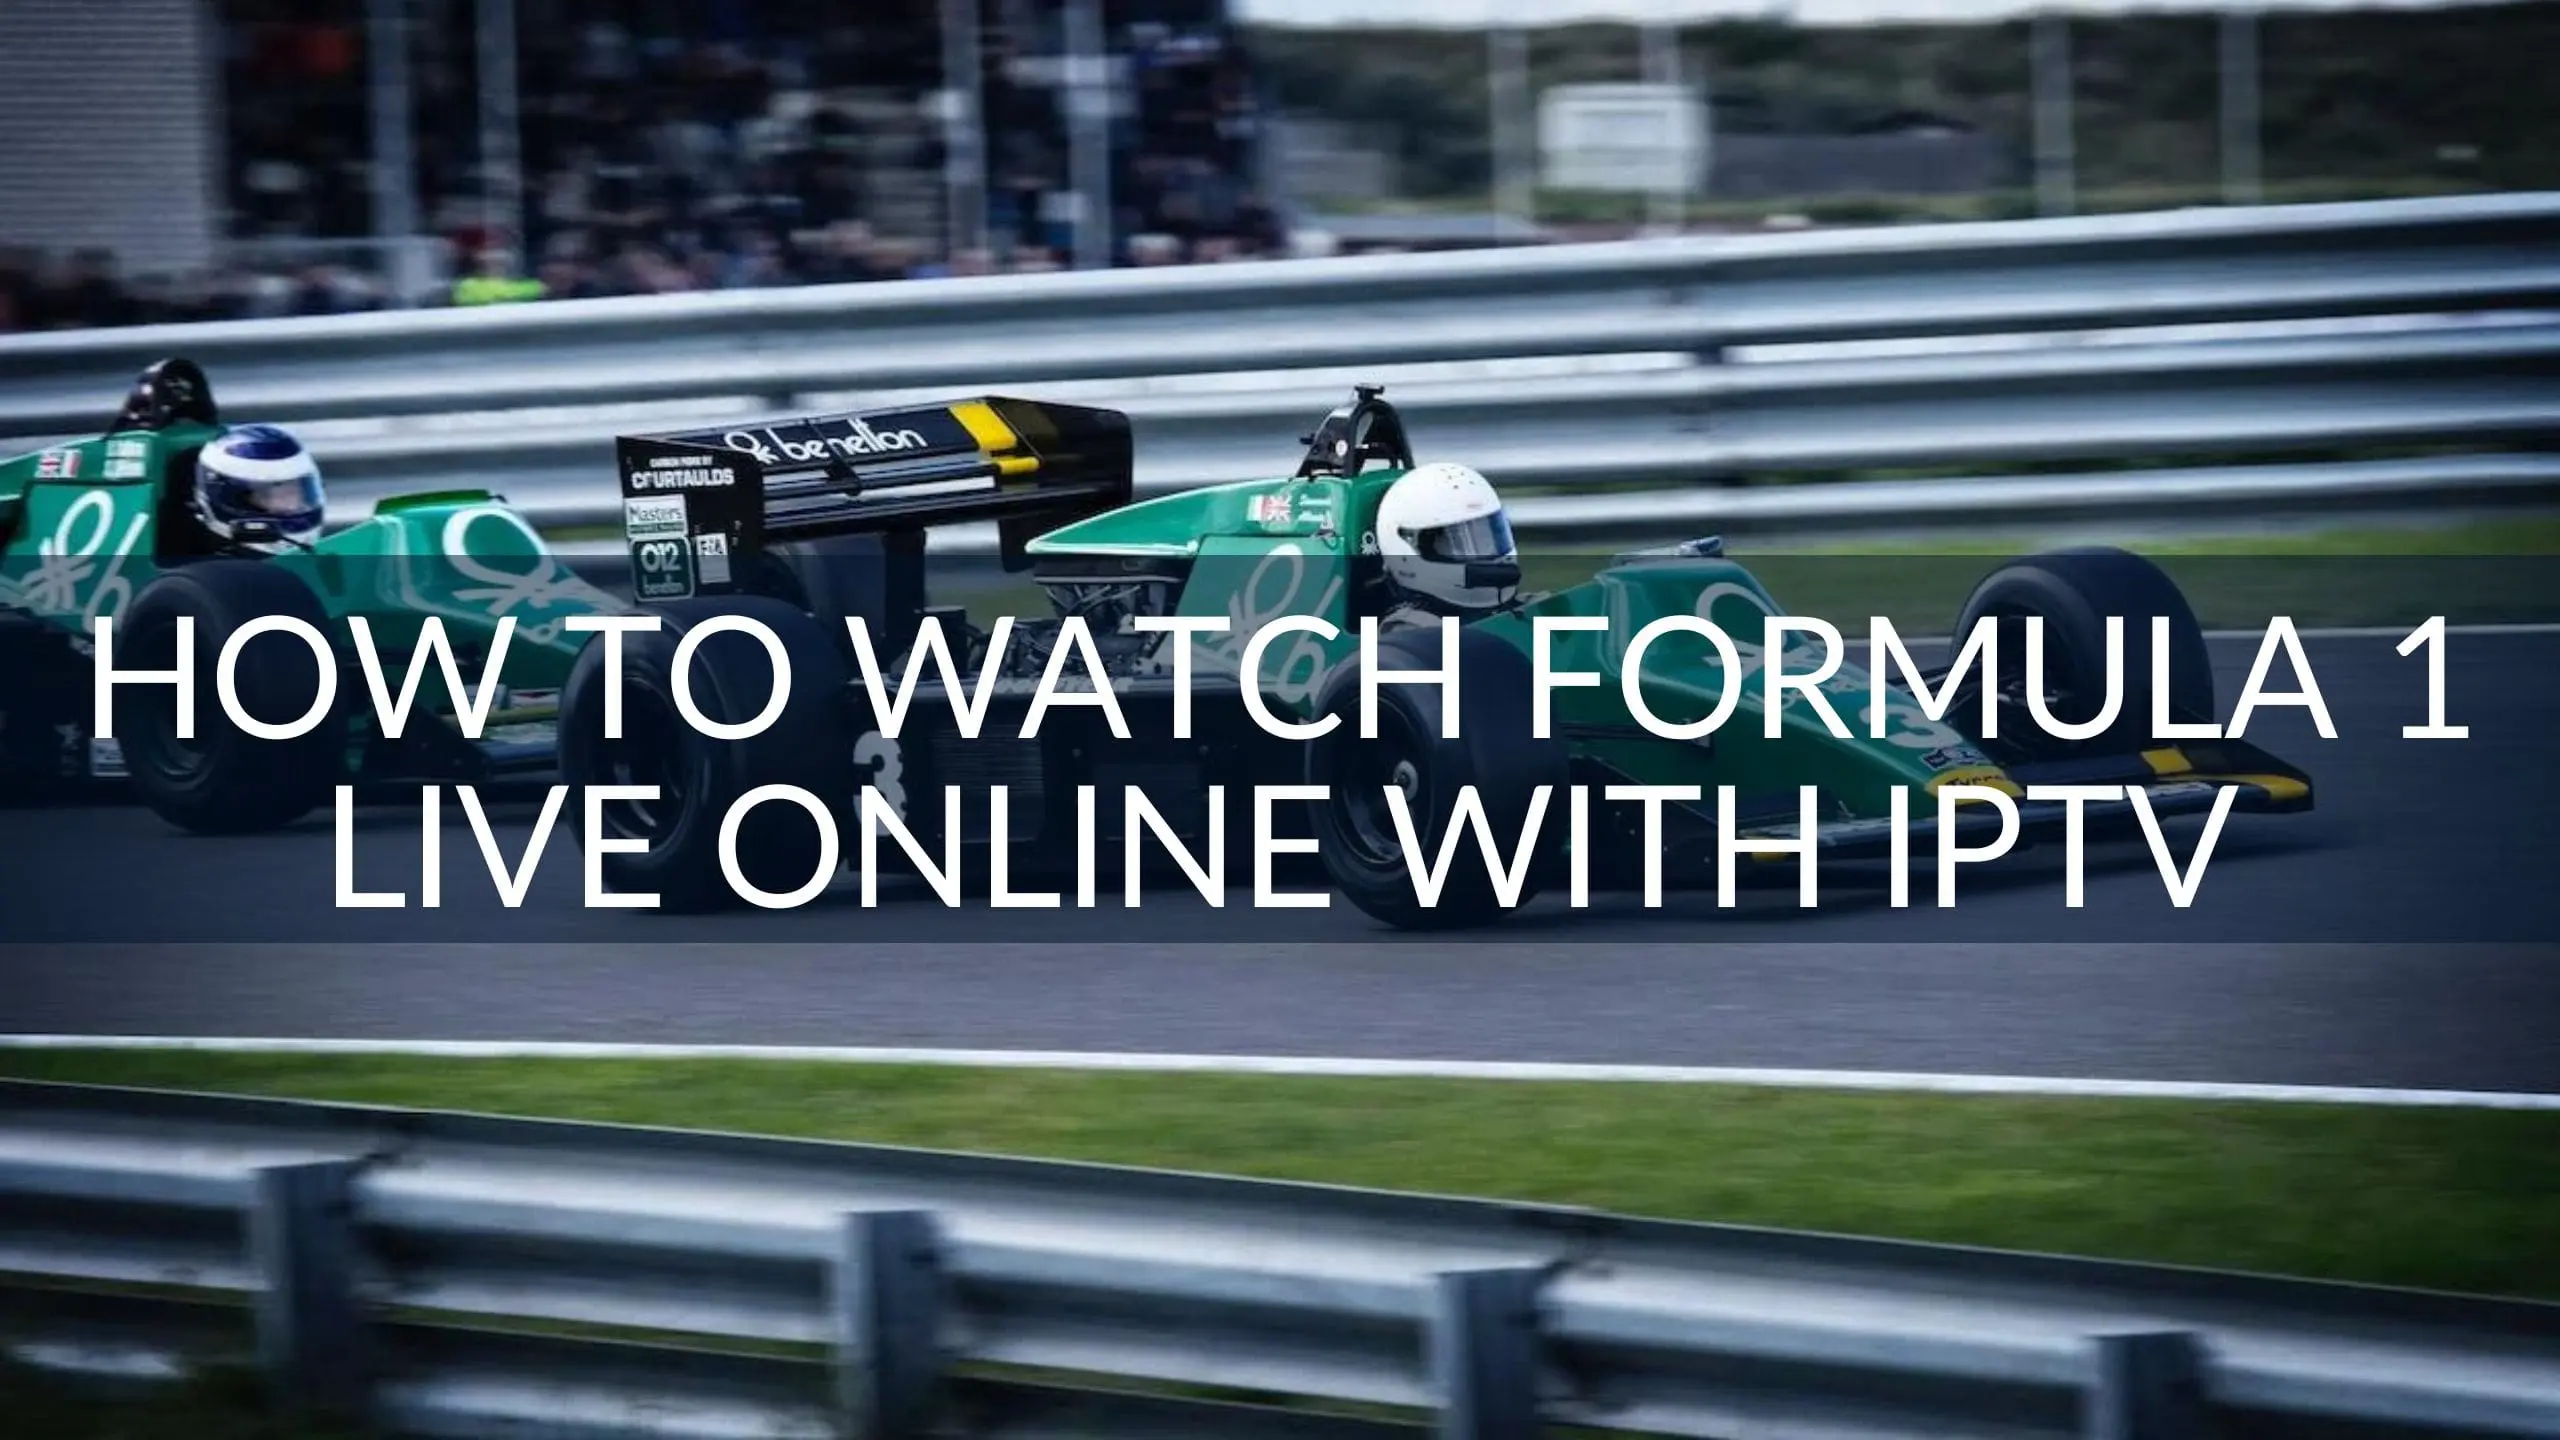 How to Watch Formula 1 Live Online with IPTV